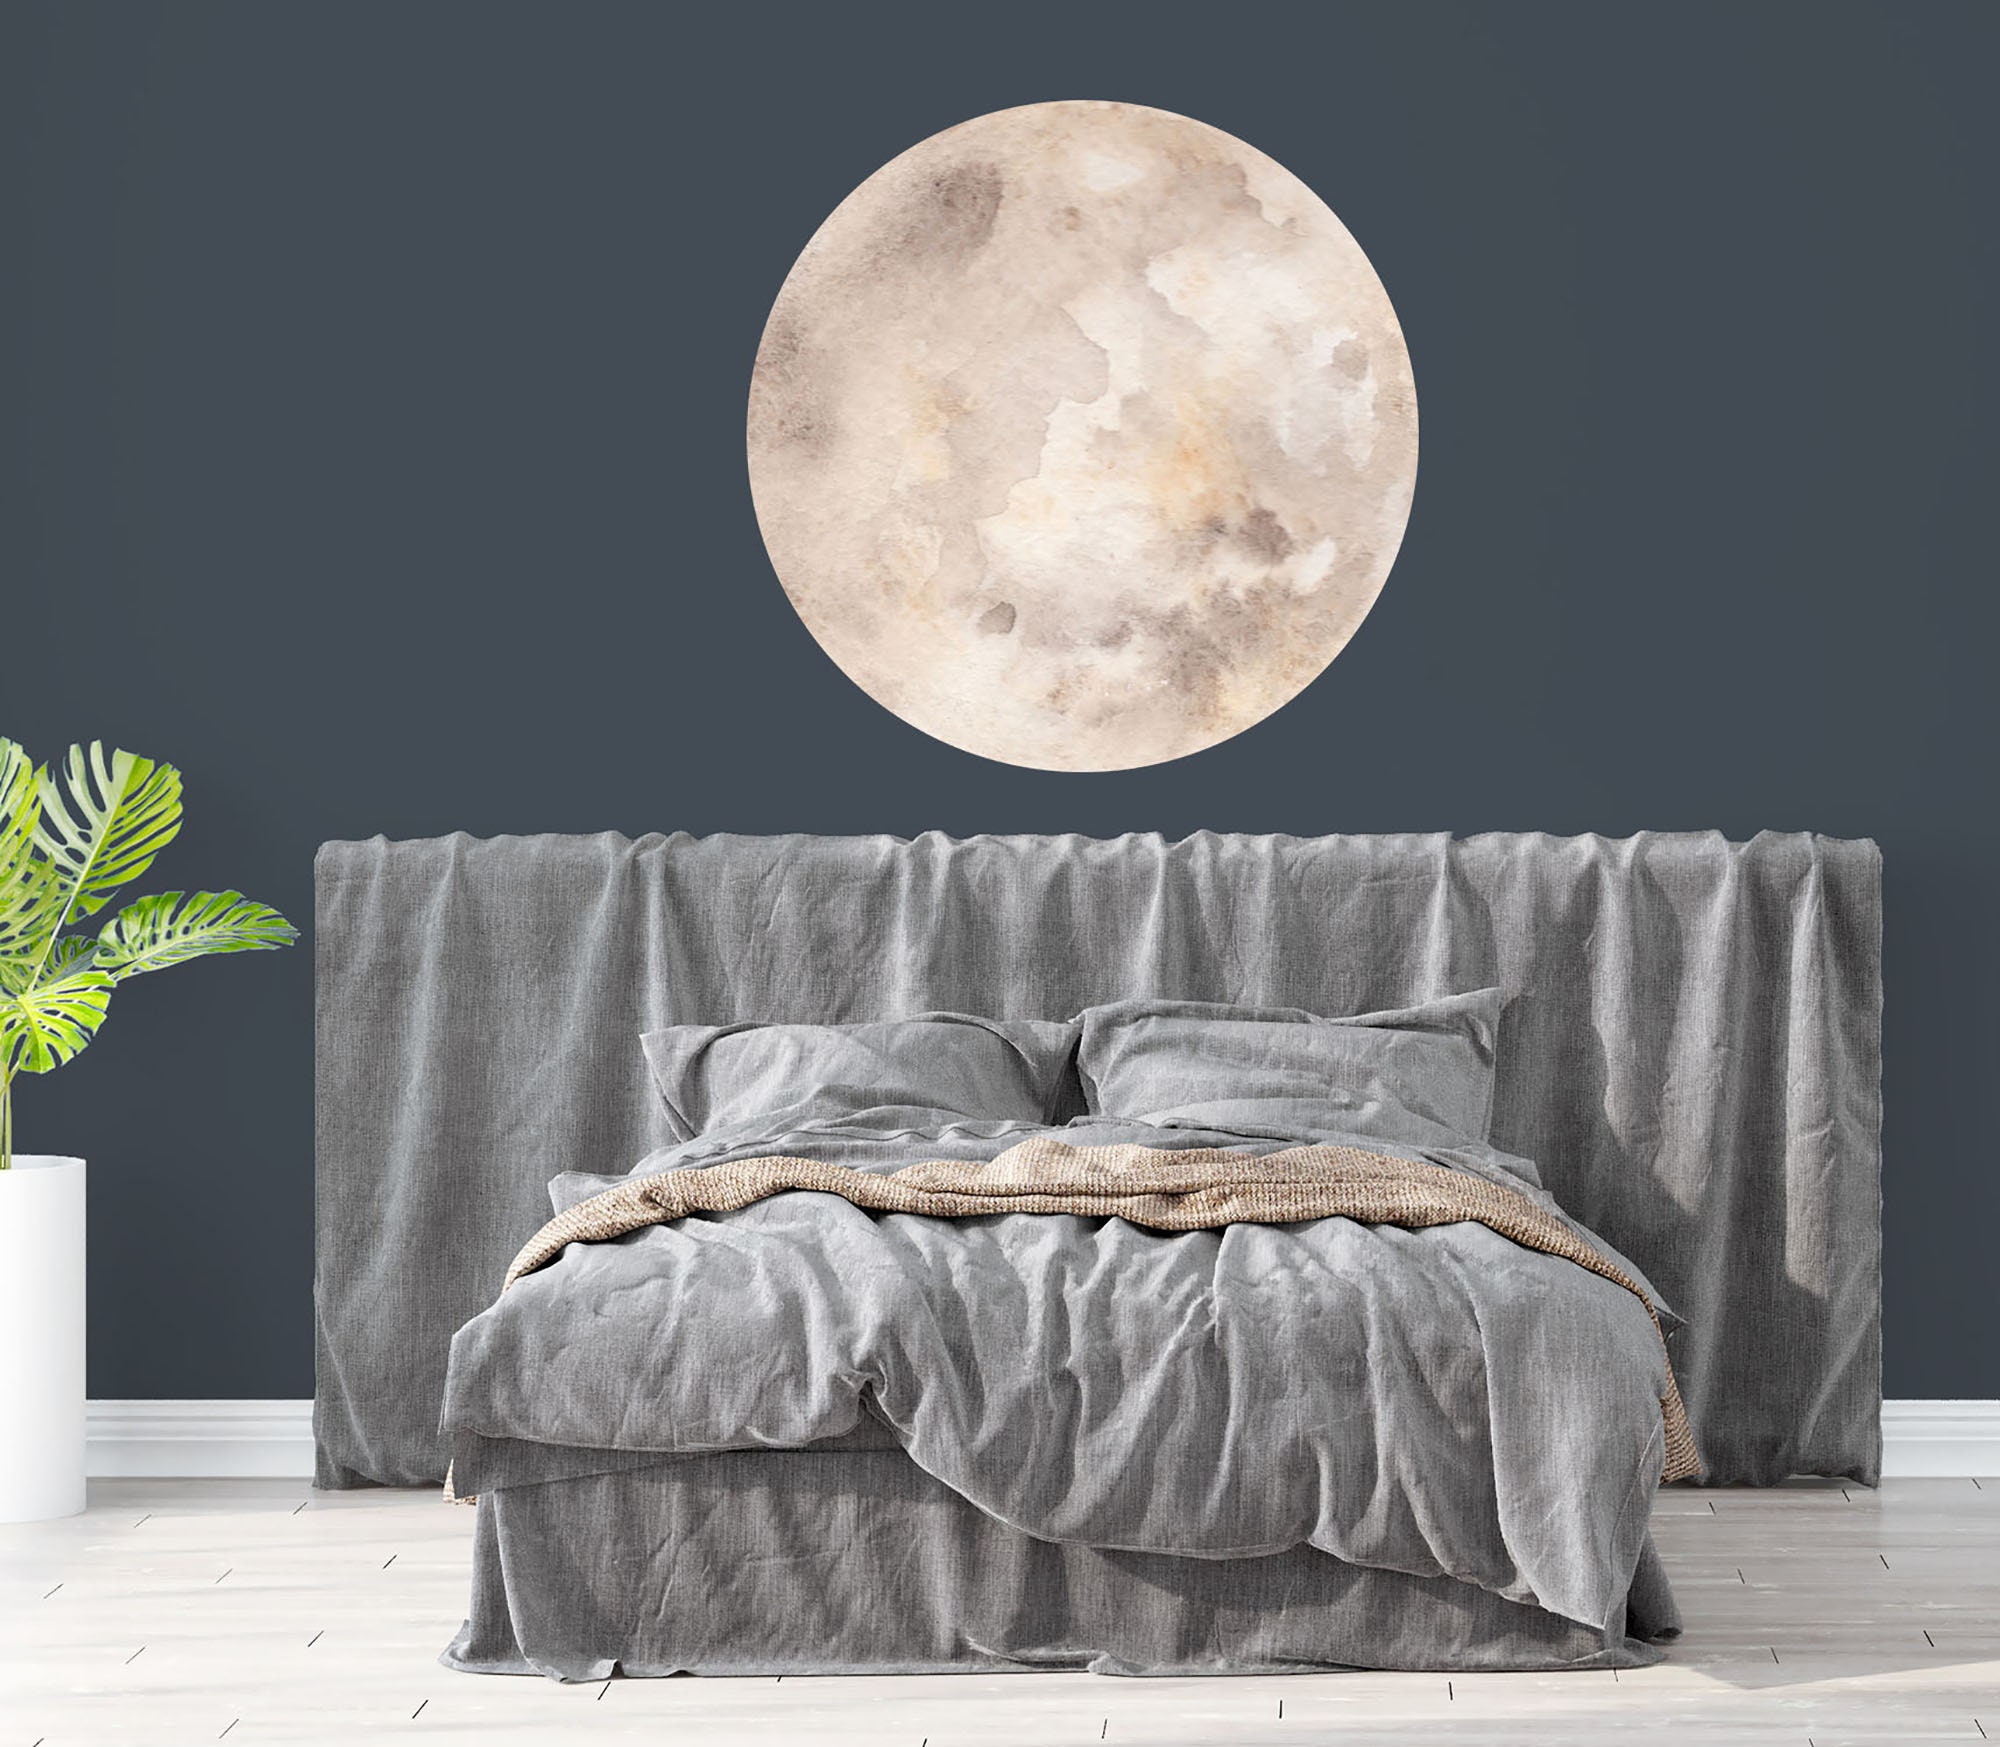 Wall Etsy Watercolor Wall Kids - Decor. Wall Moon 3D Stickers. Decal. Mural Realistic Themed Nursery Decals. Moon Space Nursery NS2087 Room Moon